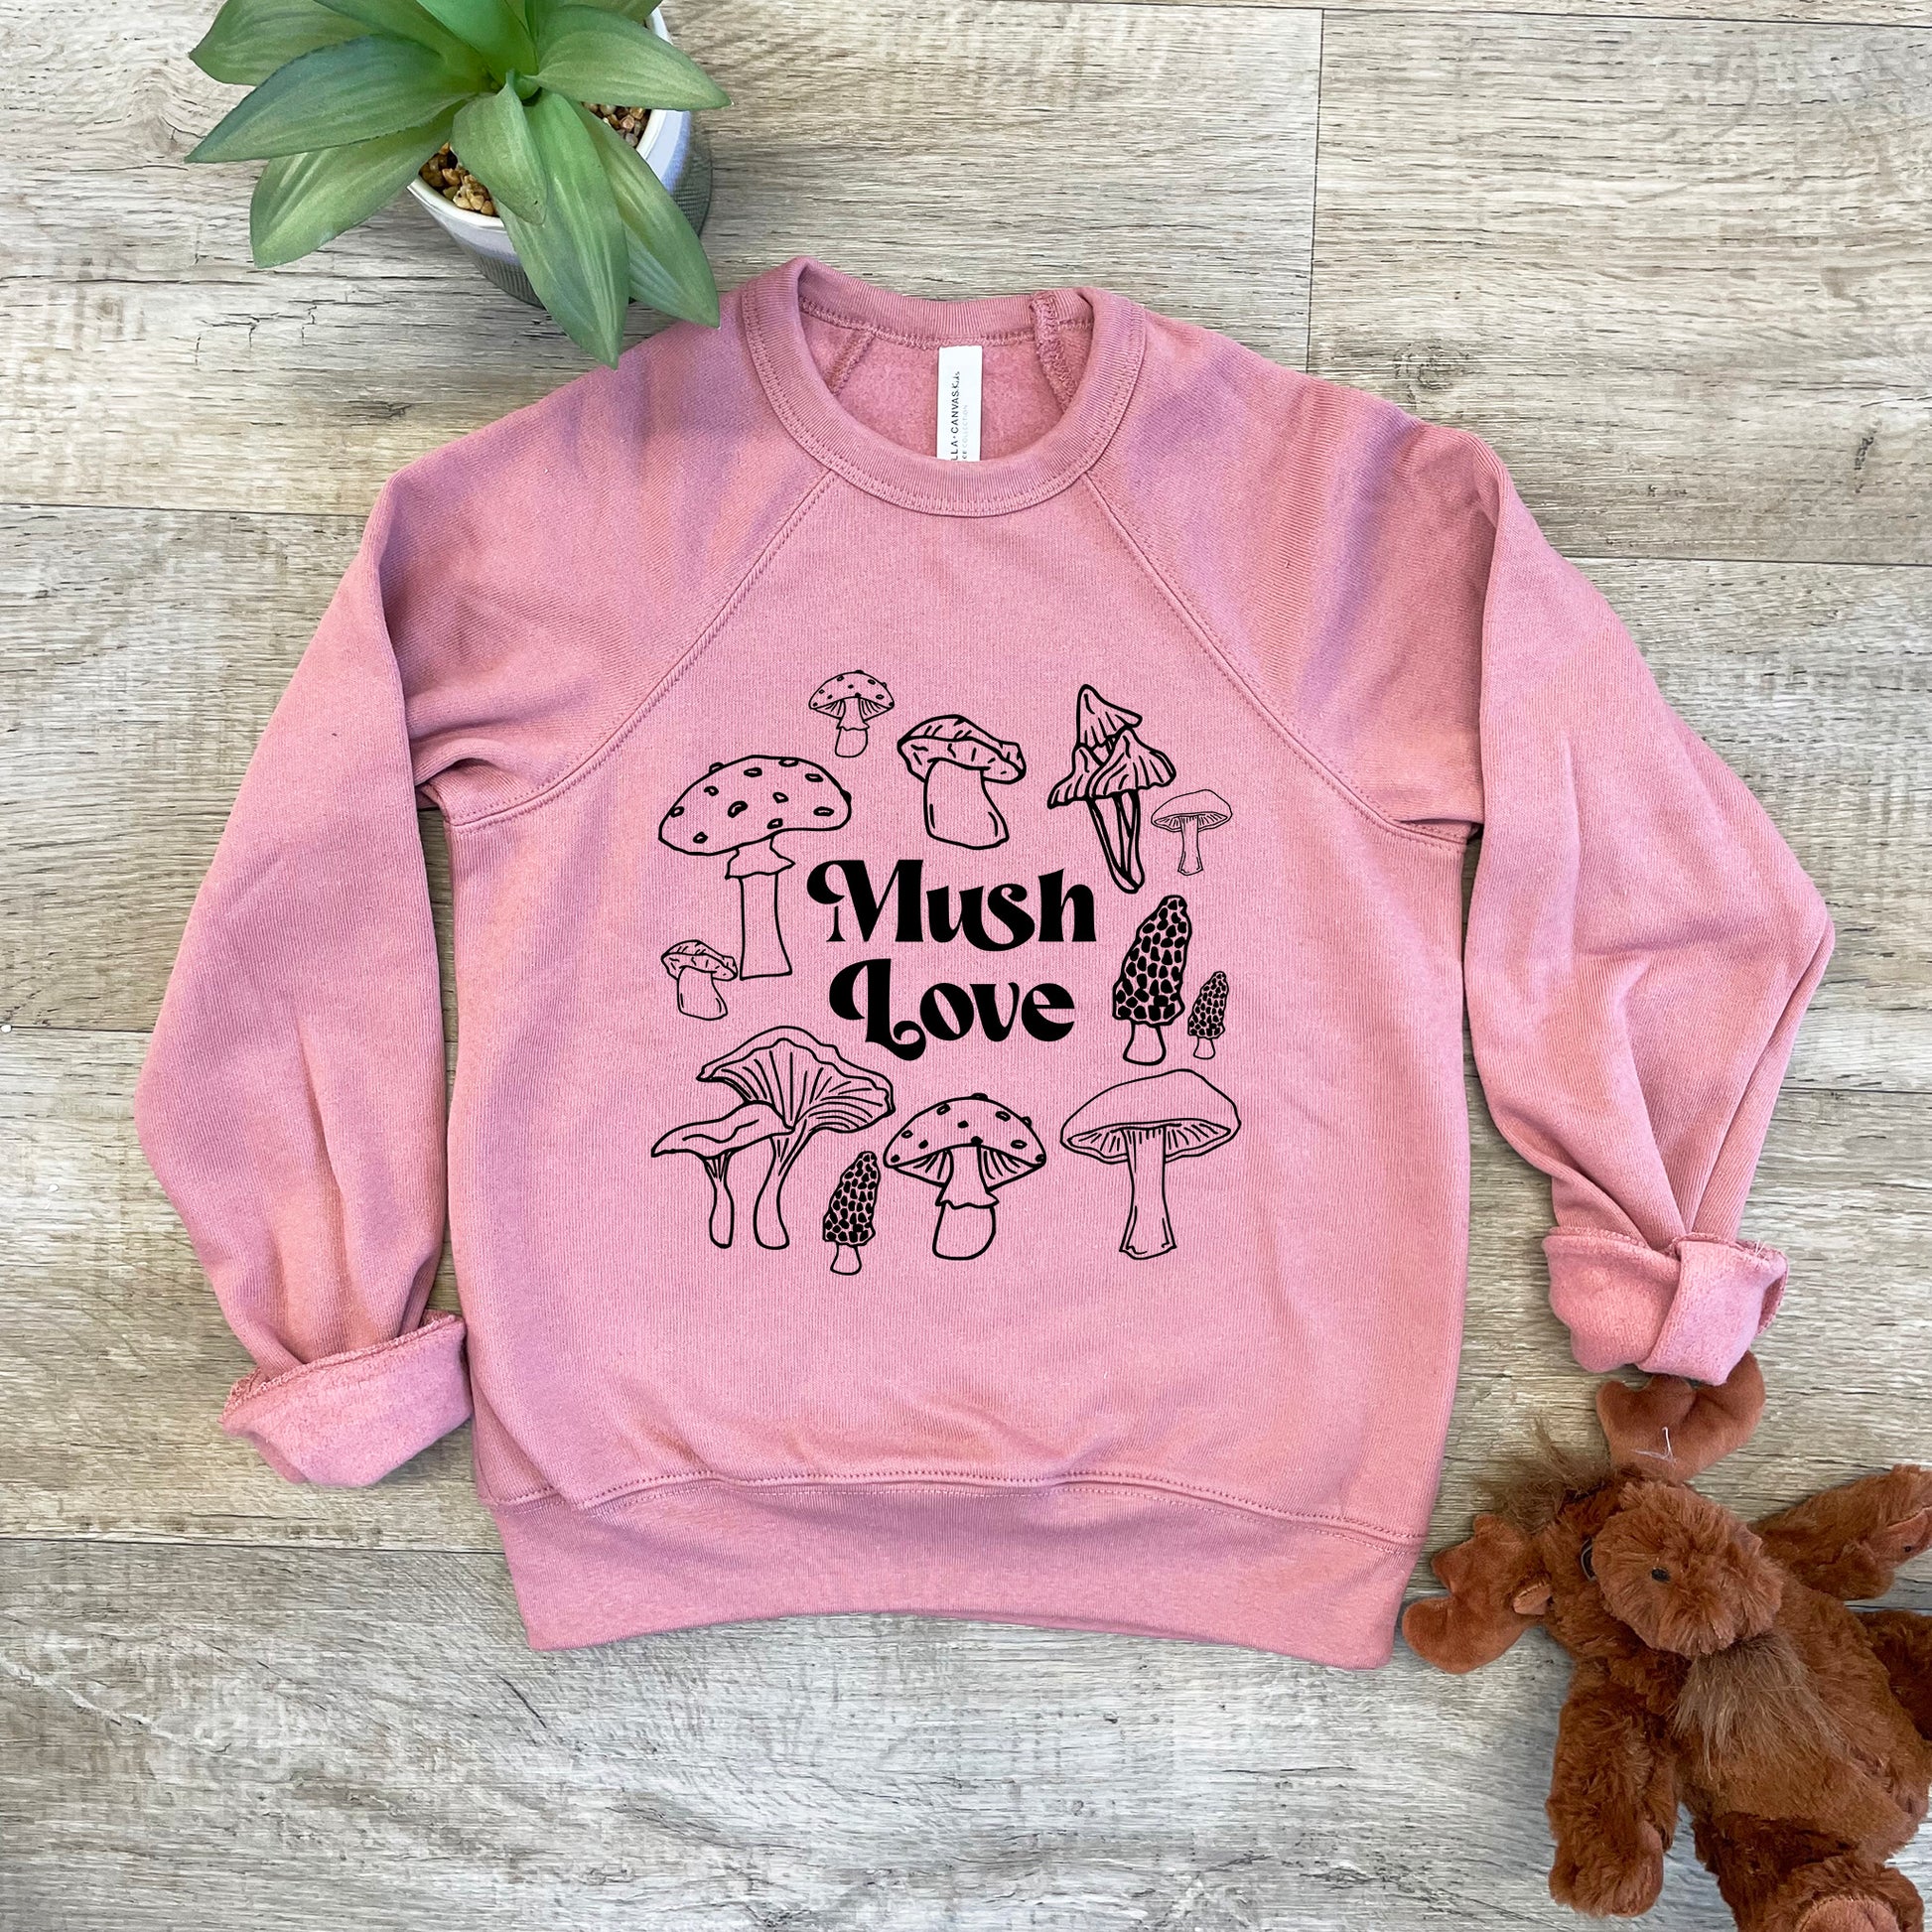 a pink sweatshirt with mushrooms on it next to a teddy bear